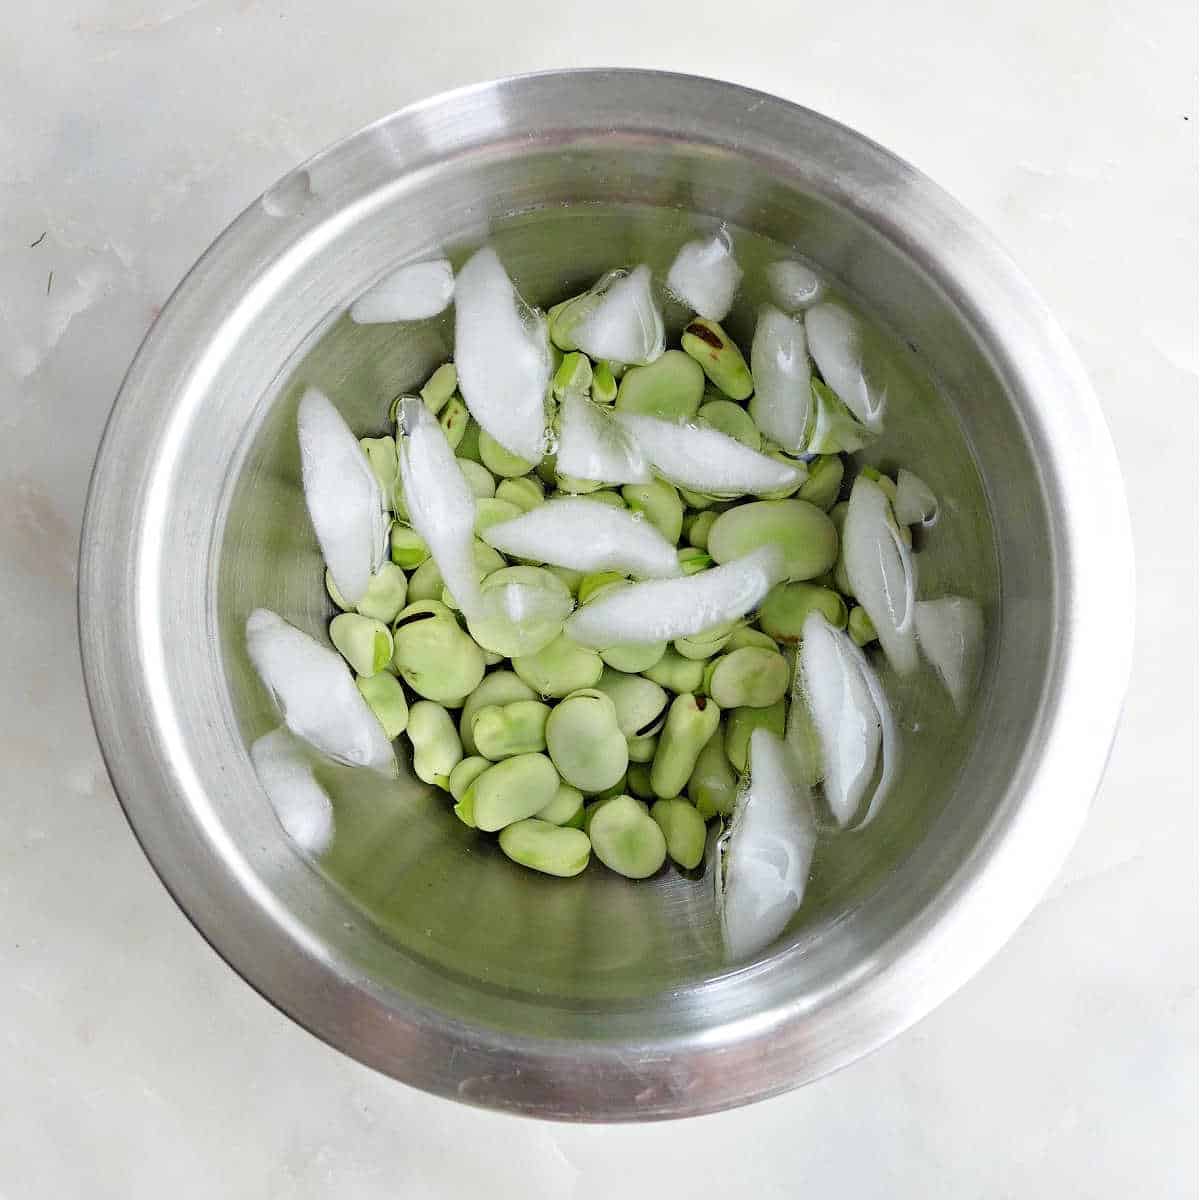 blanched fava beans in a bowl of ice water on a counter